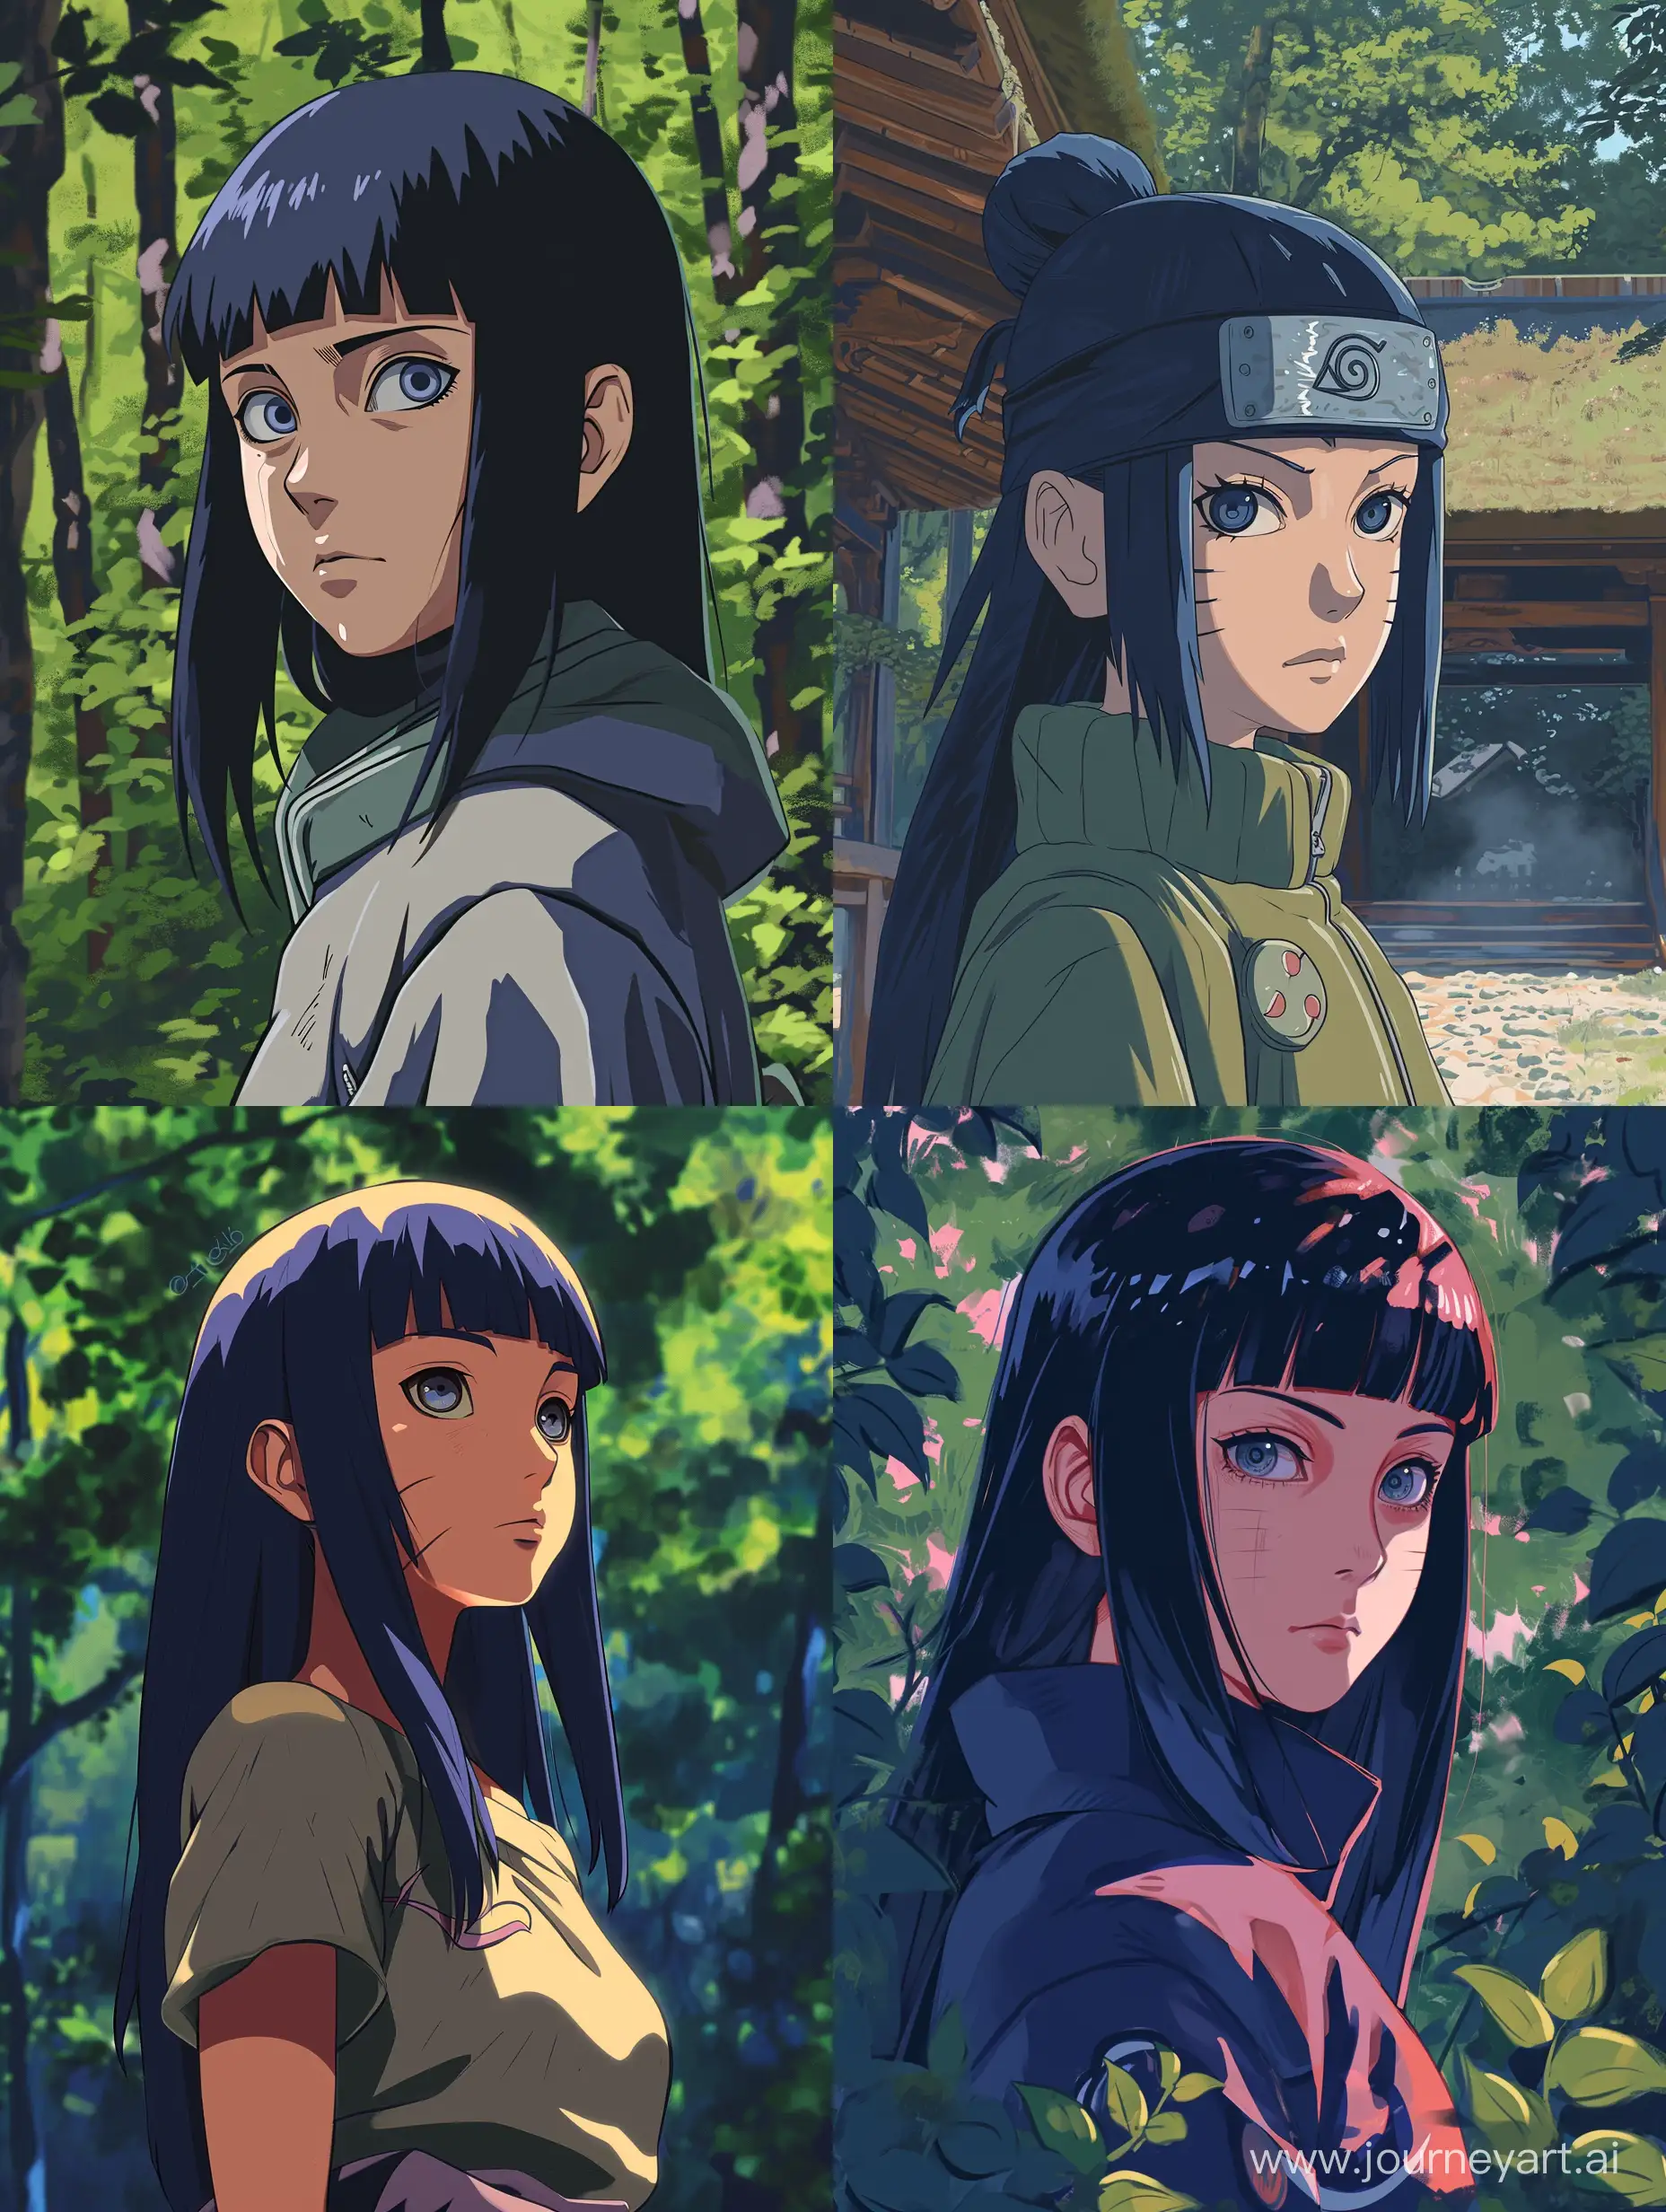 A picture of Hinata Hyuga inspired by Studio Ghibli Art Style